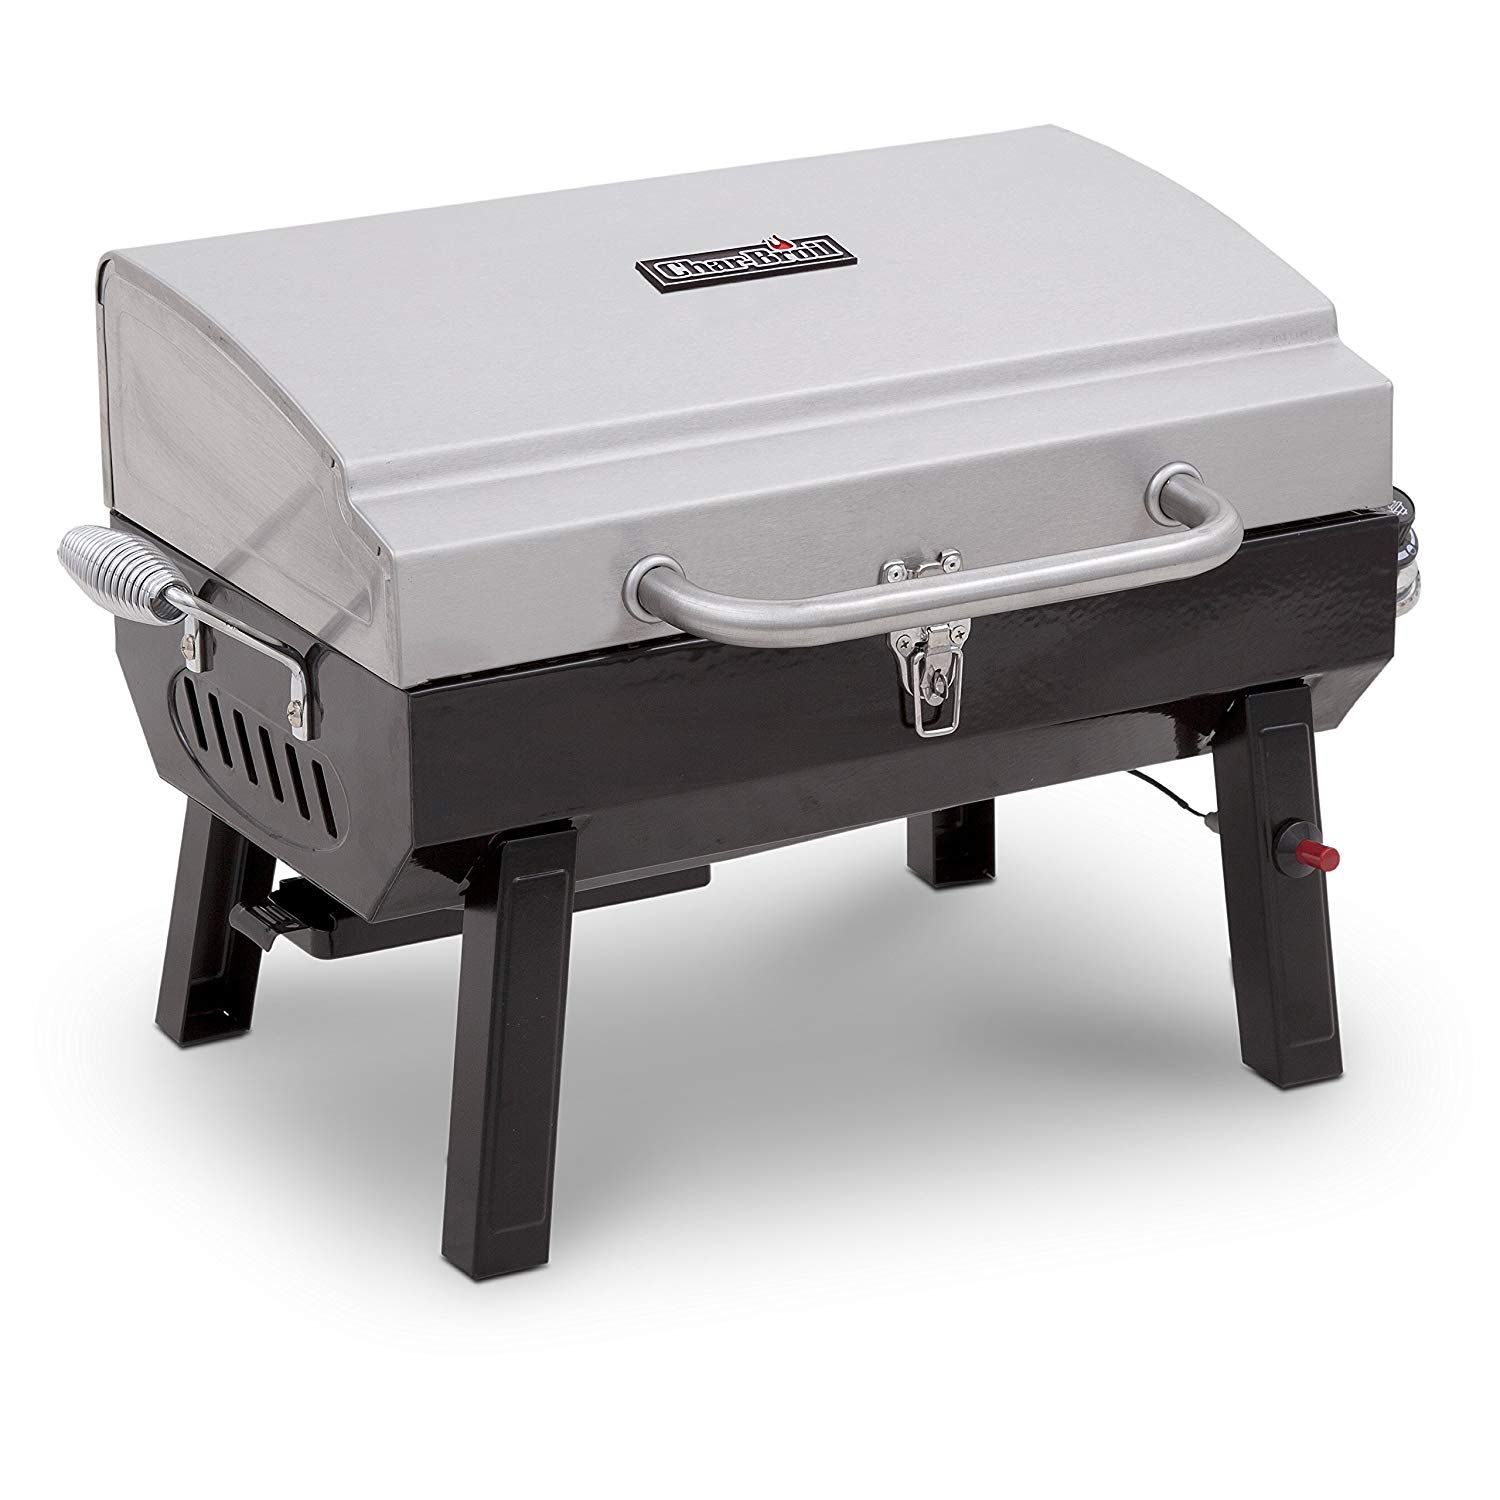 Stainless Steel Gas Grills Reviews - Buy Electric, Charcoal and Propane Grills At Best Prices